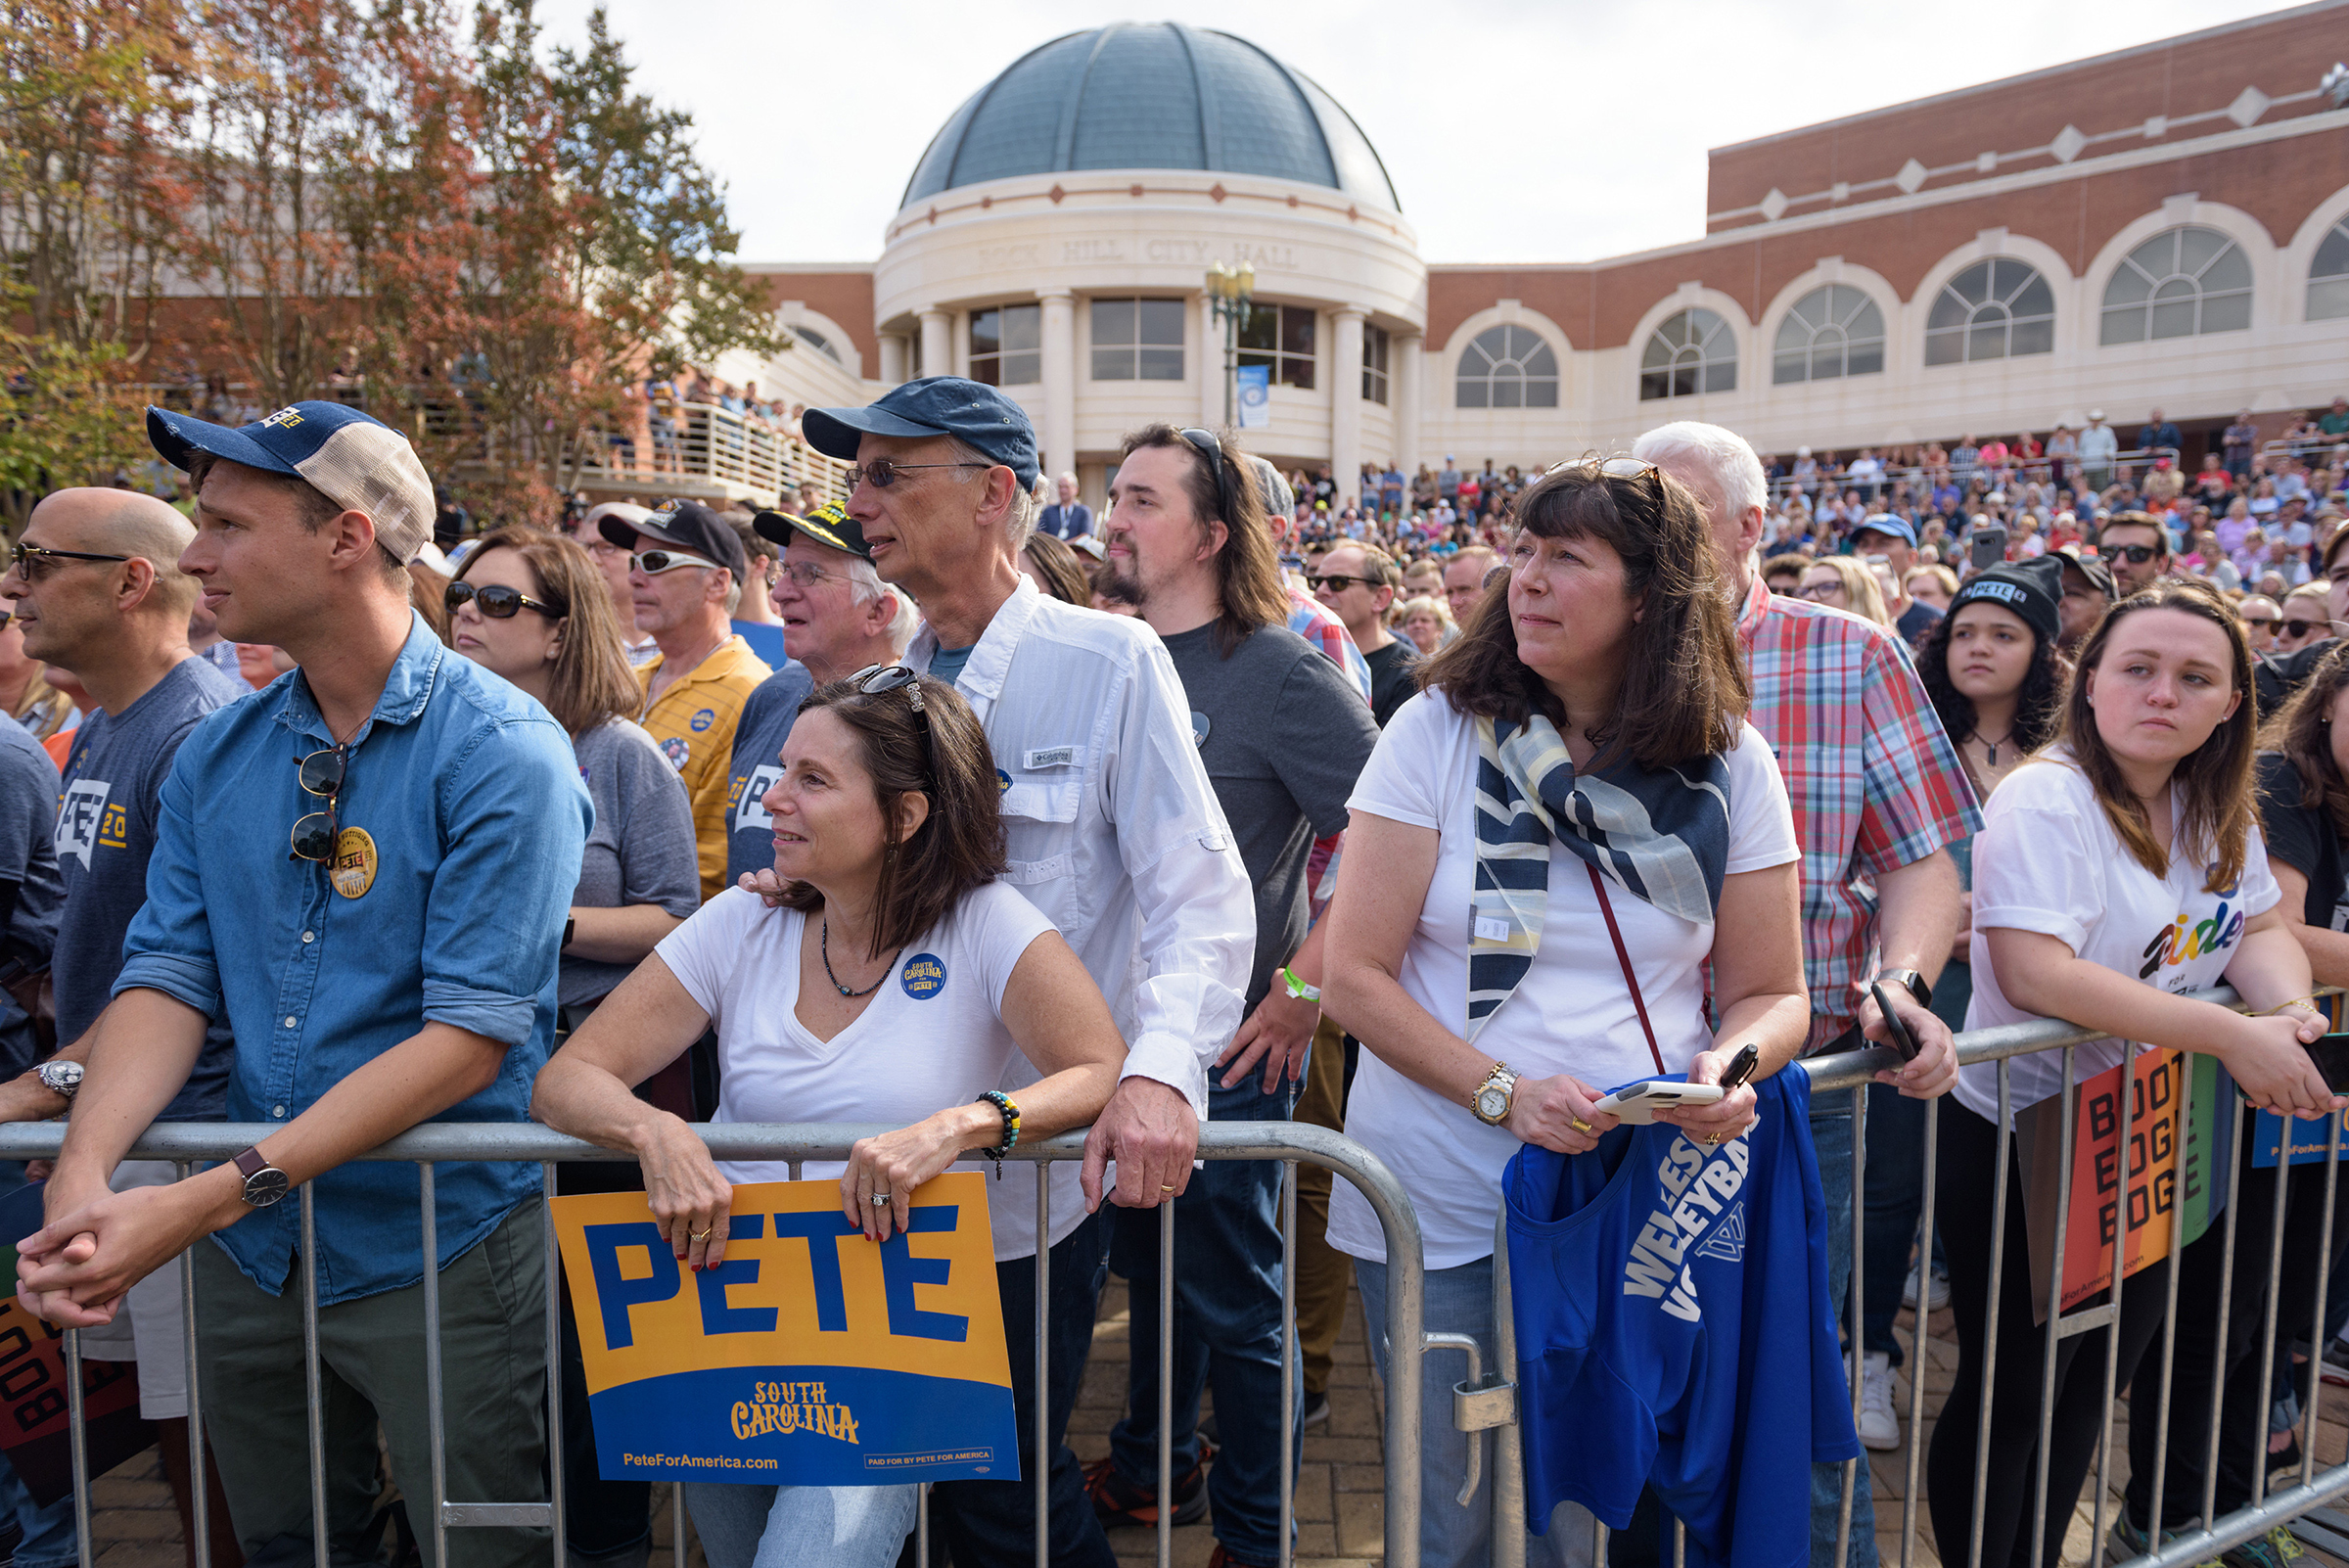 Attendees wait for Mayor Pete Buttigieg of South Bend, Ind., a Democratic presidential hopeful, to arrive at a campaign event in Rock Hill, S.C., on Oct. 26, 2019. (Bryan Cereijo/The New York Times)